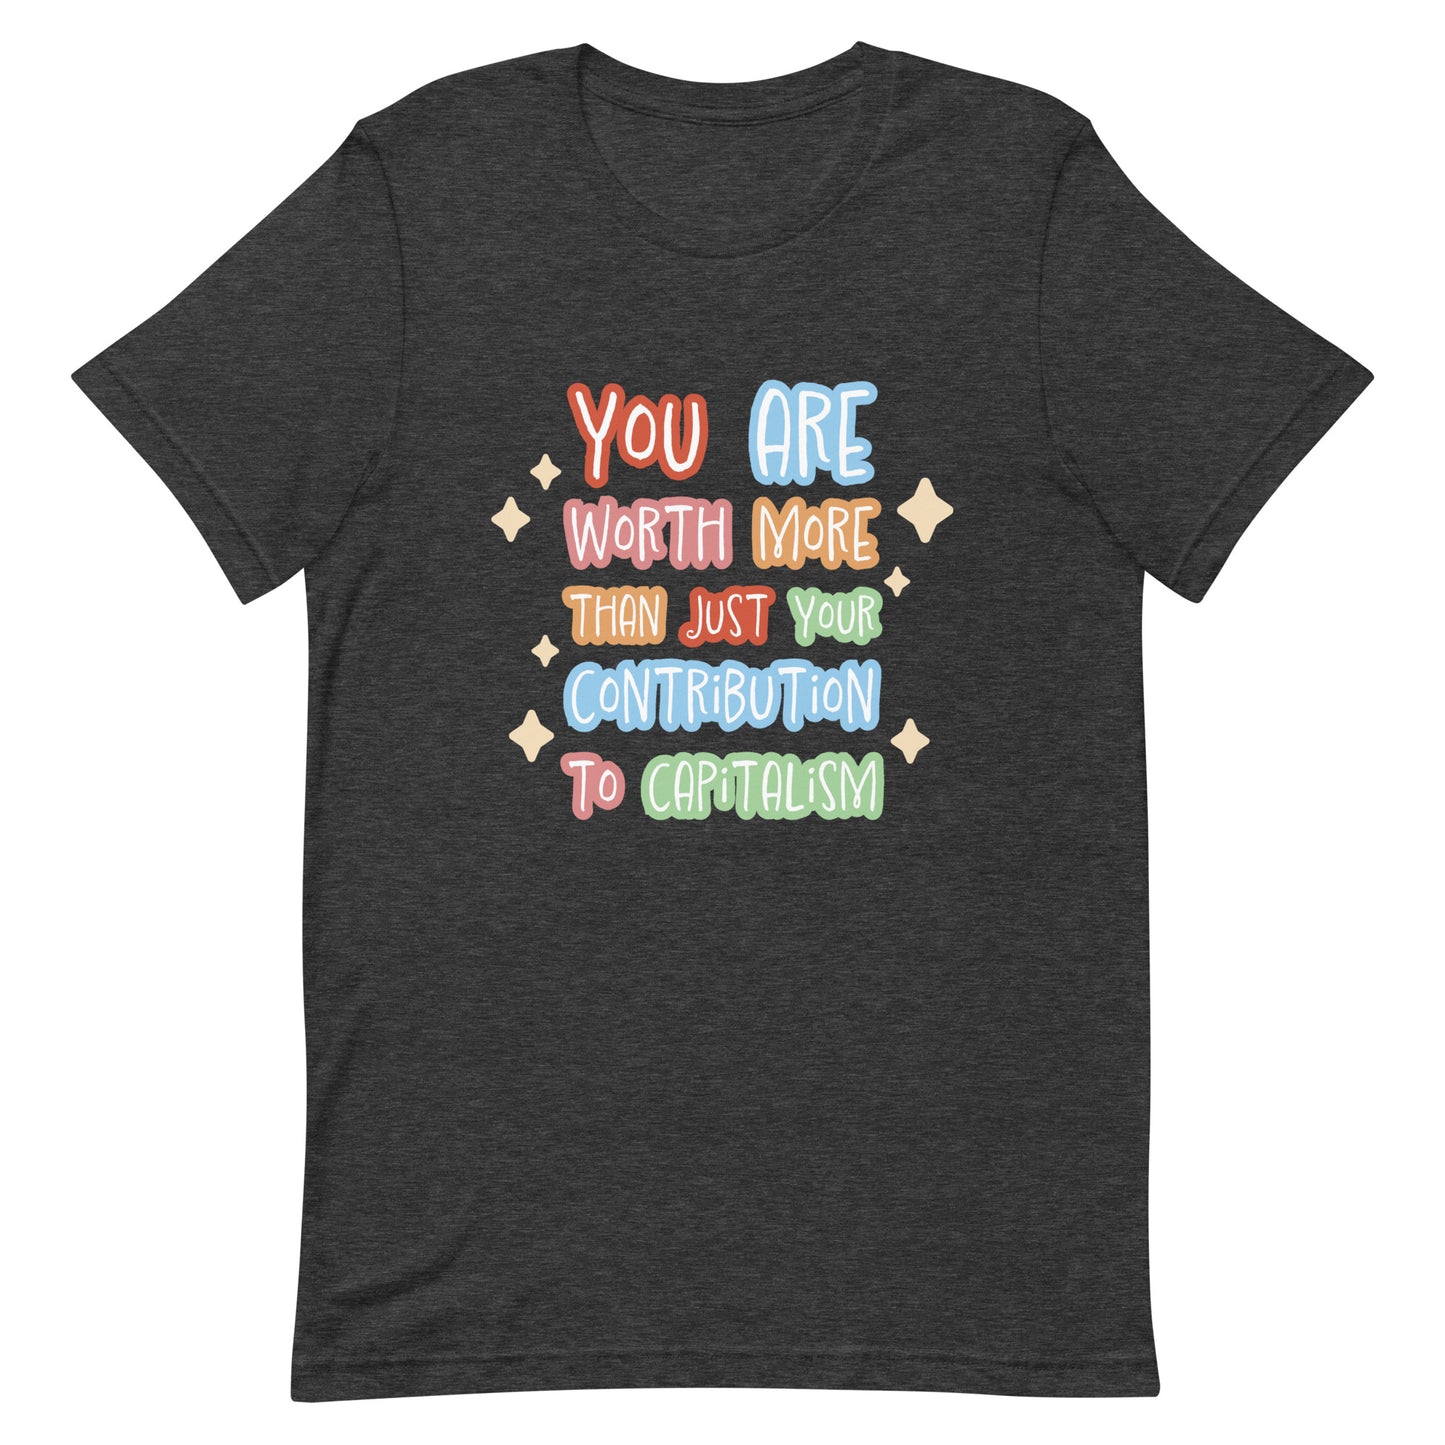 A heathered dark grey crewneck t-shirt featuring colorful hand-written-style text that reads "You are worth more than just your contribution to capitalism". Sparkles surround the text on each side.